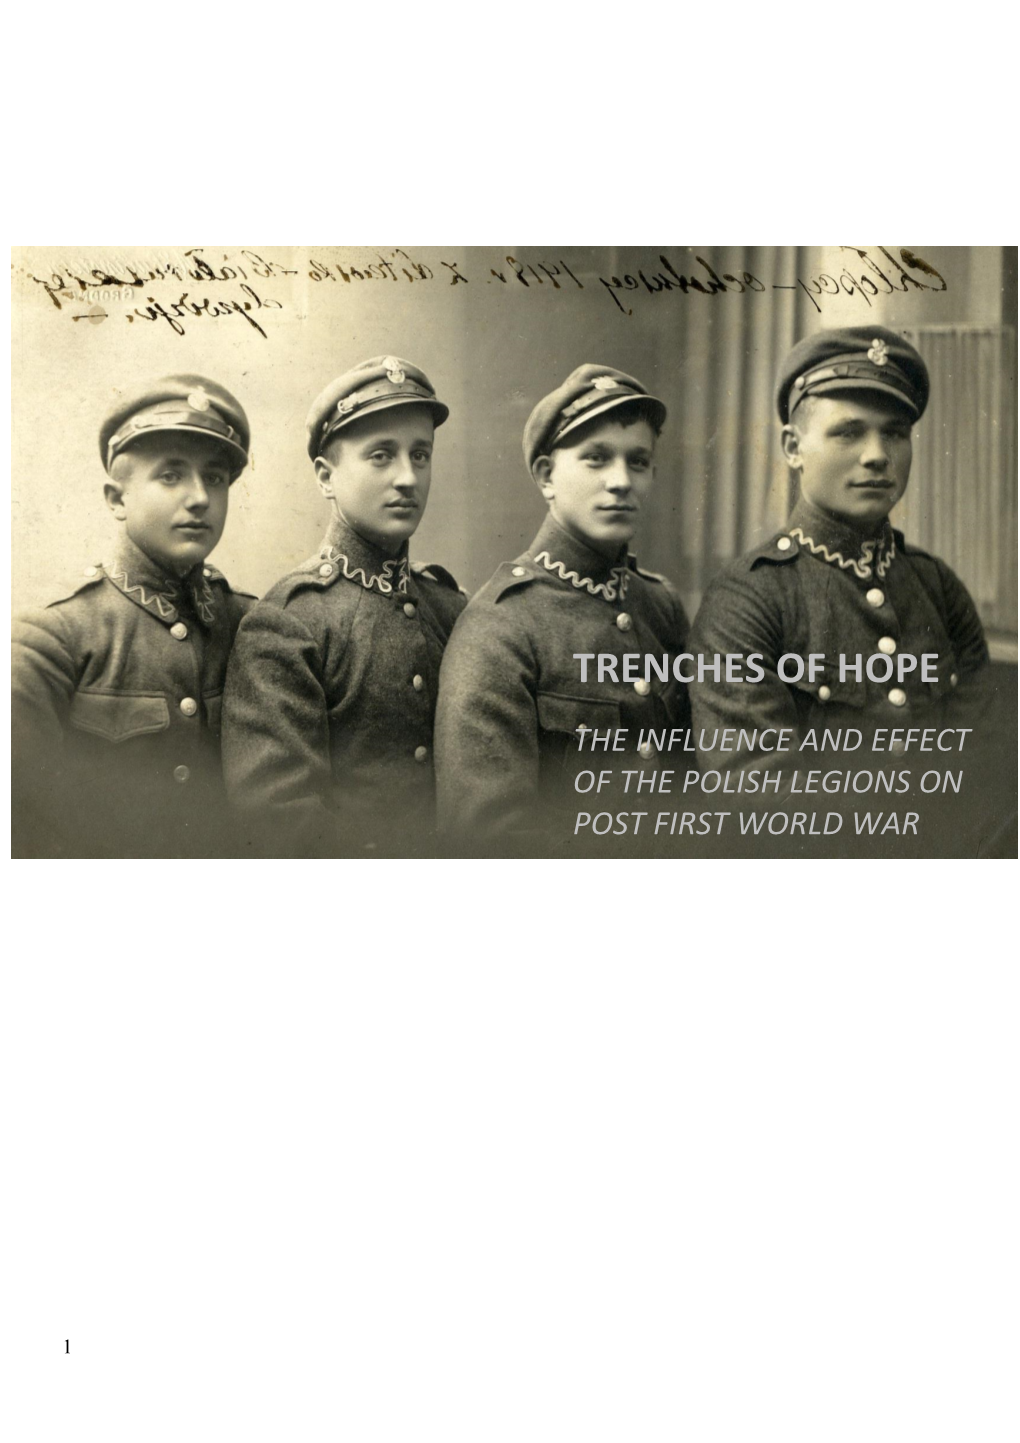 TRENCHES of HOPE CATALOGUE.Pdf